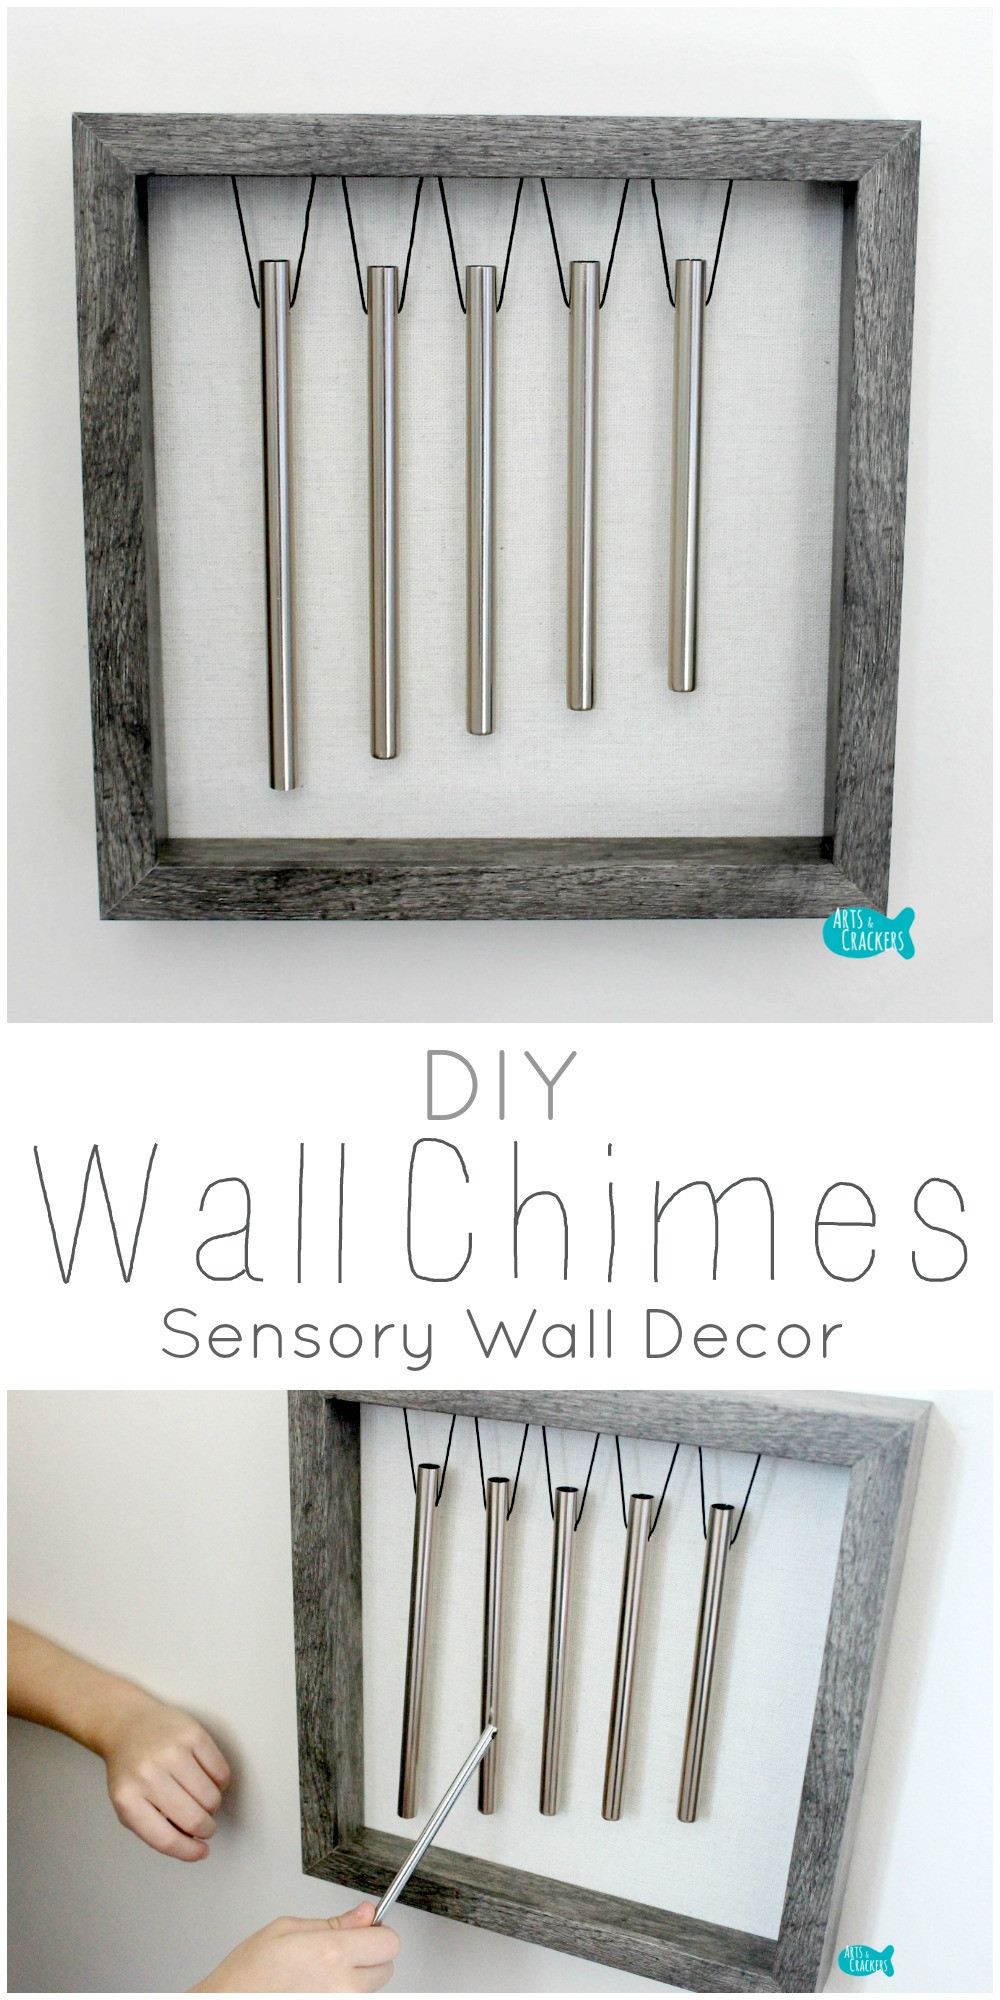 DIY Musical Instruments For Adults
 DIY Wind Chimes